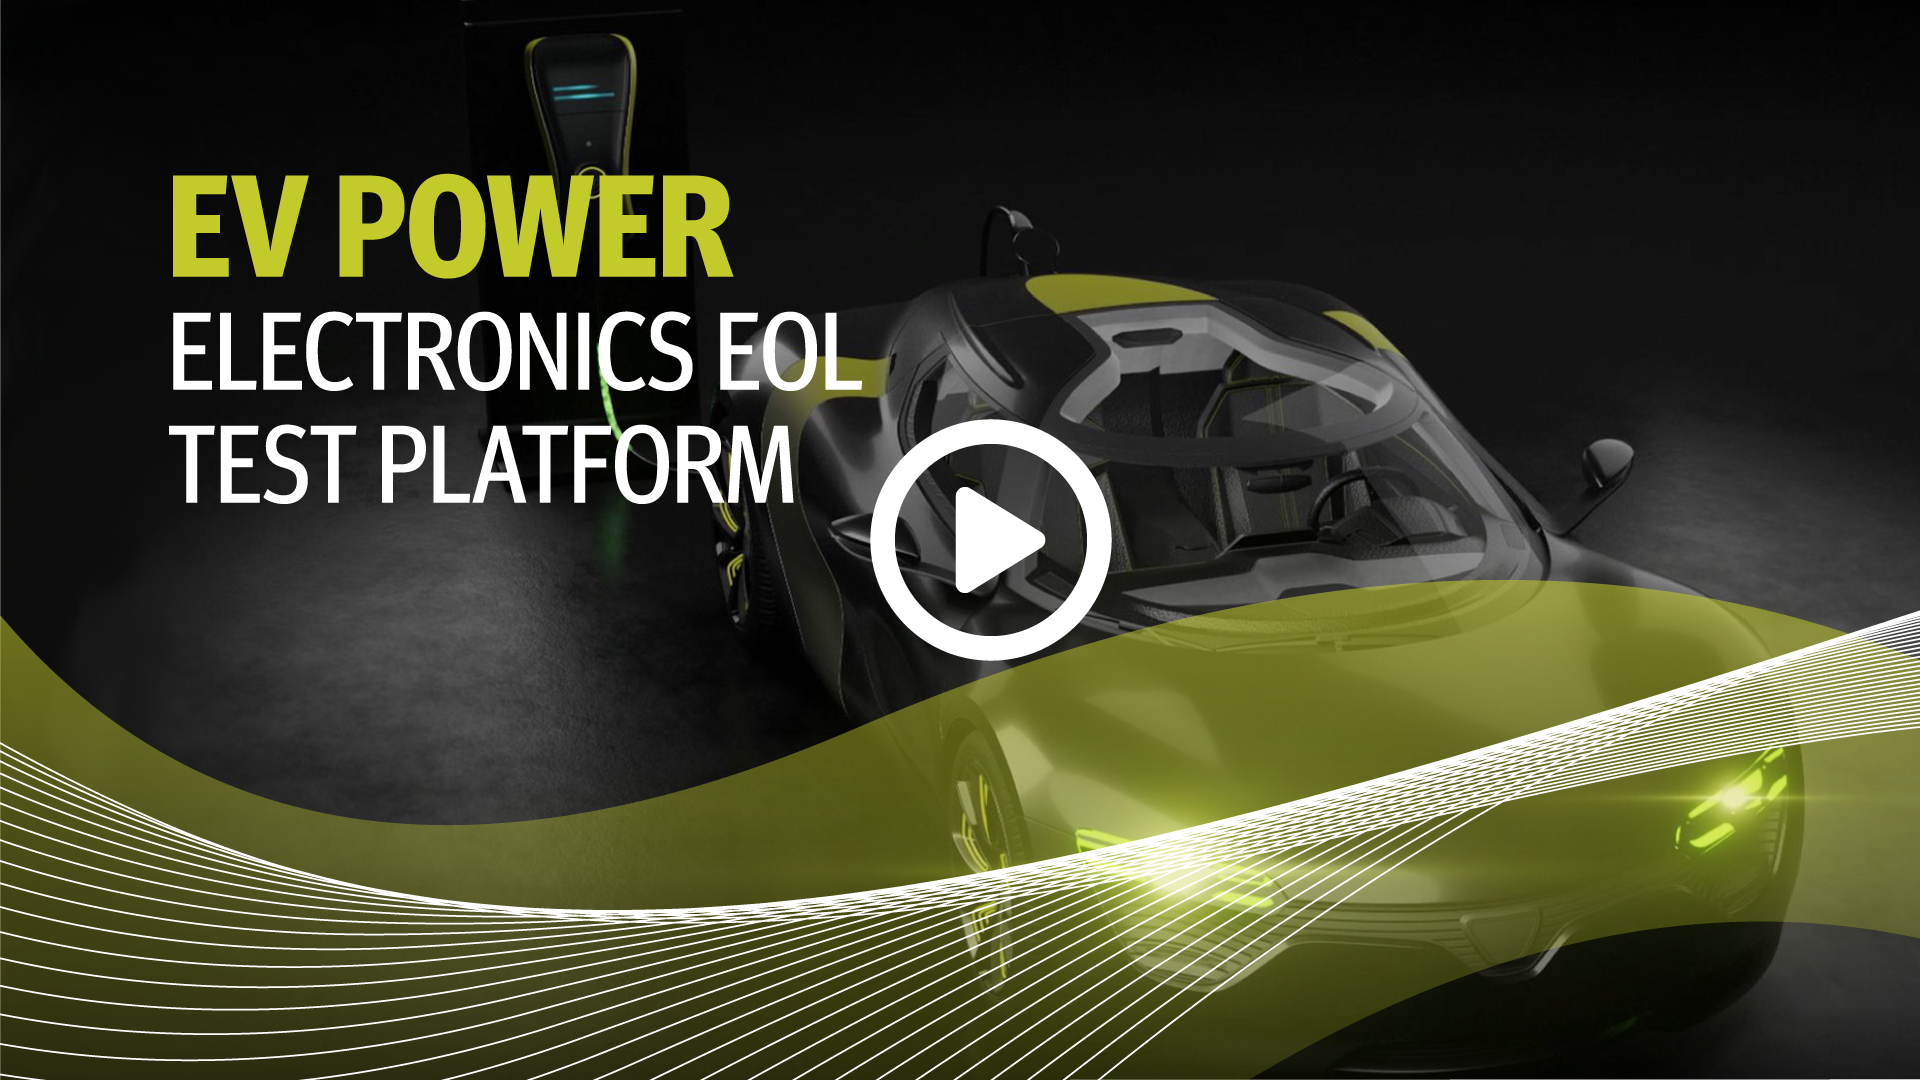 Cover of the Video for the all-in-one EV Power Component EOL Testing Platform